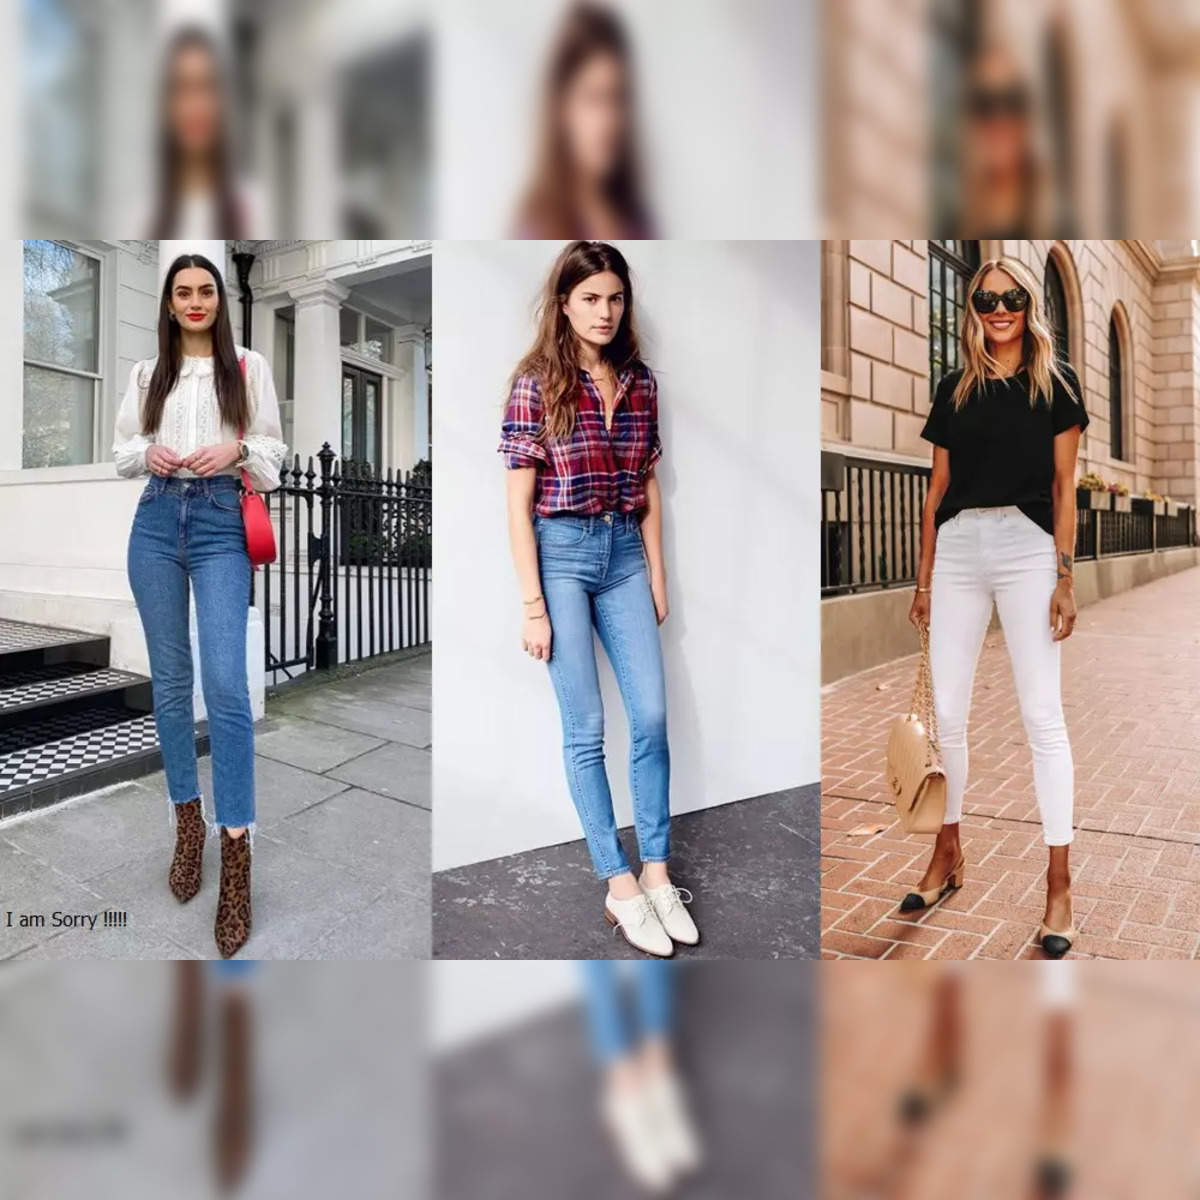 high waist jeans for women: Best High Waist Jeans for Women starting at Rs  786 - The Economic Times